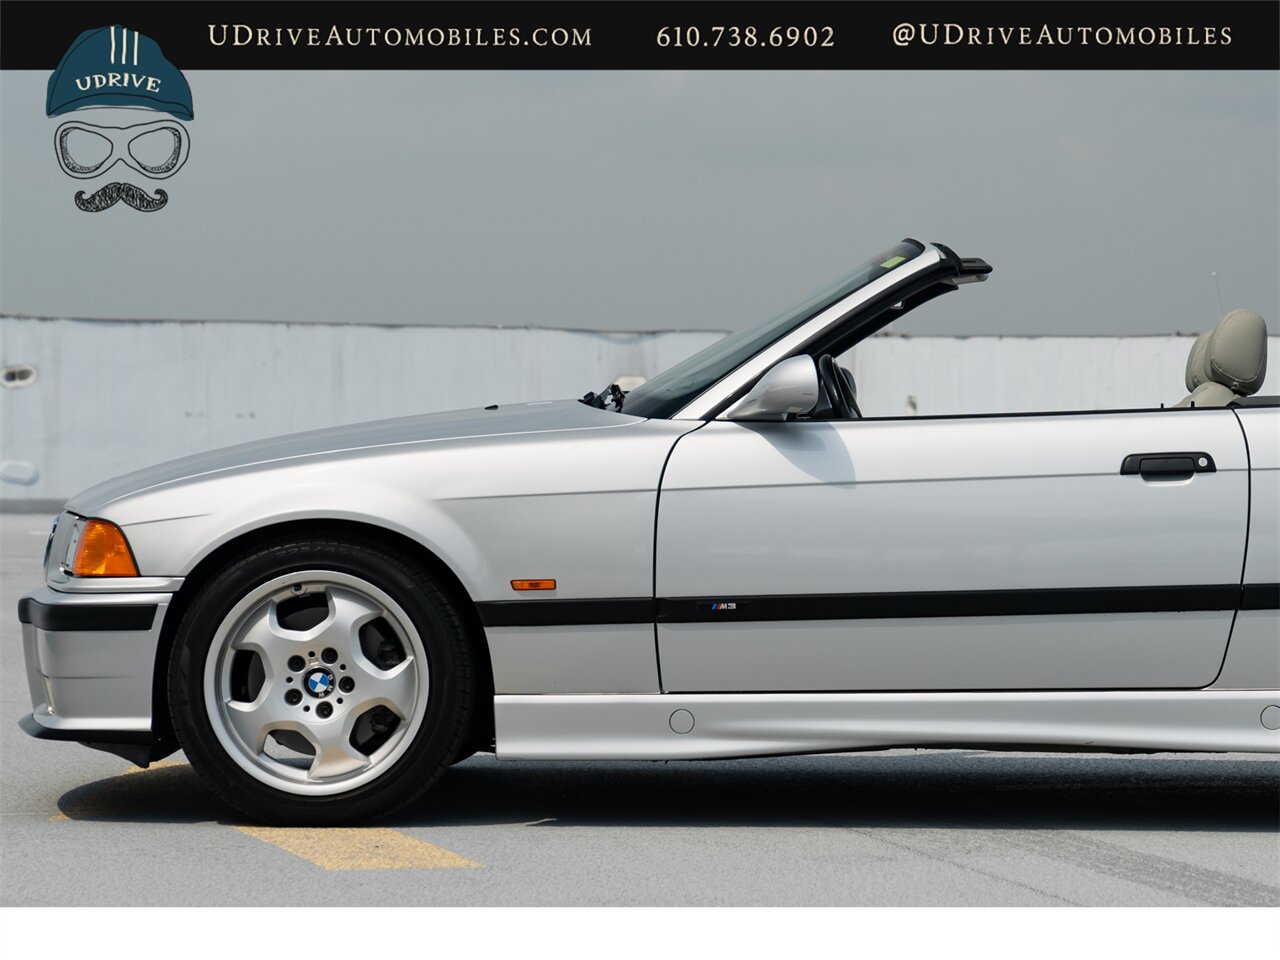 1998 BMW M3 Convertible  Automatic $7k Recent Service Low Miles - Photo 10 - West Chester, PA 19382